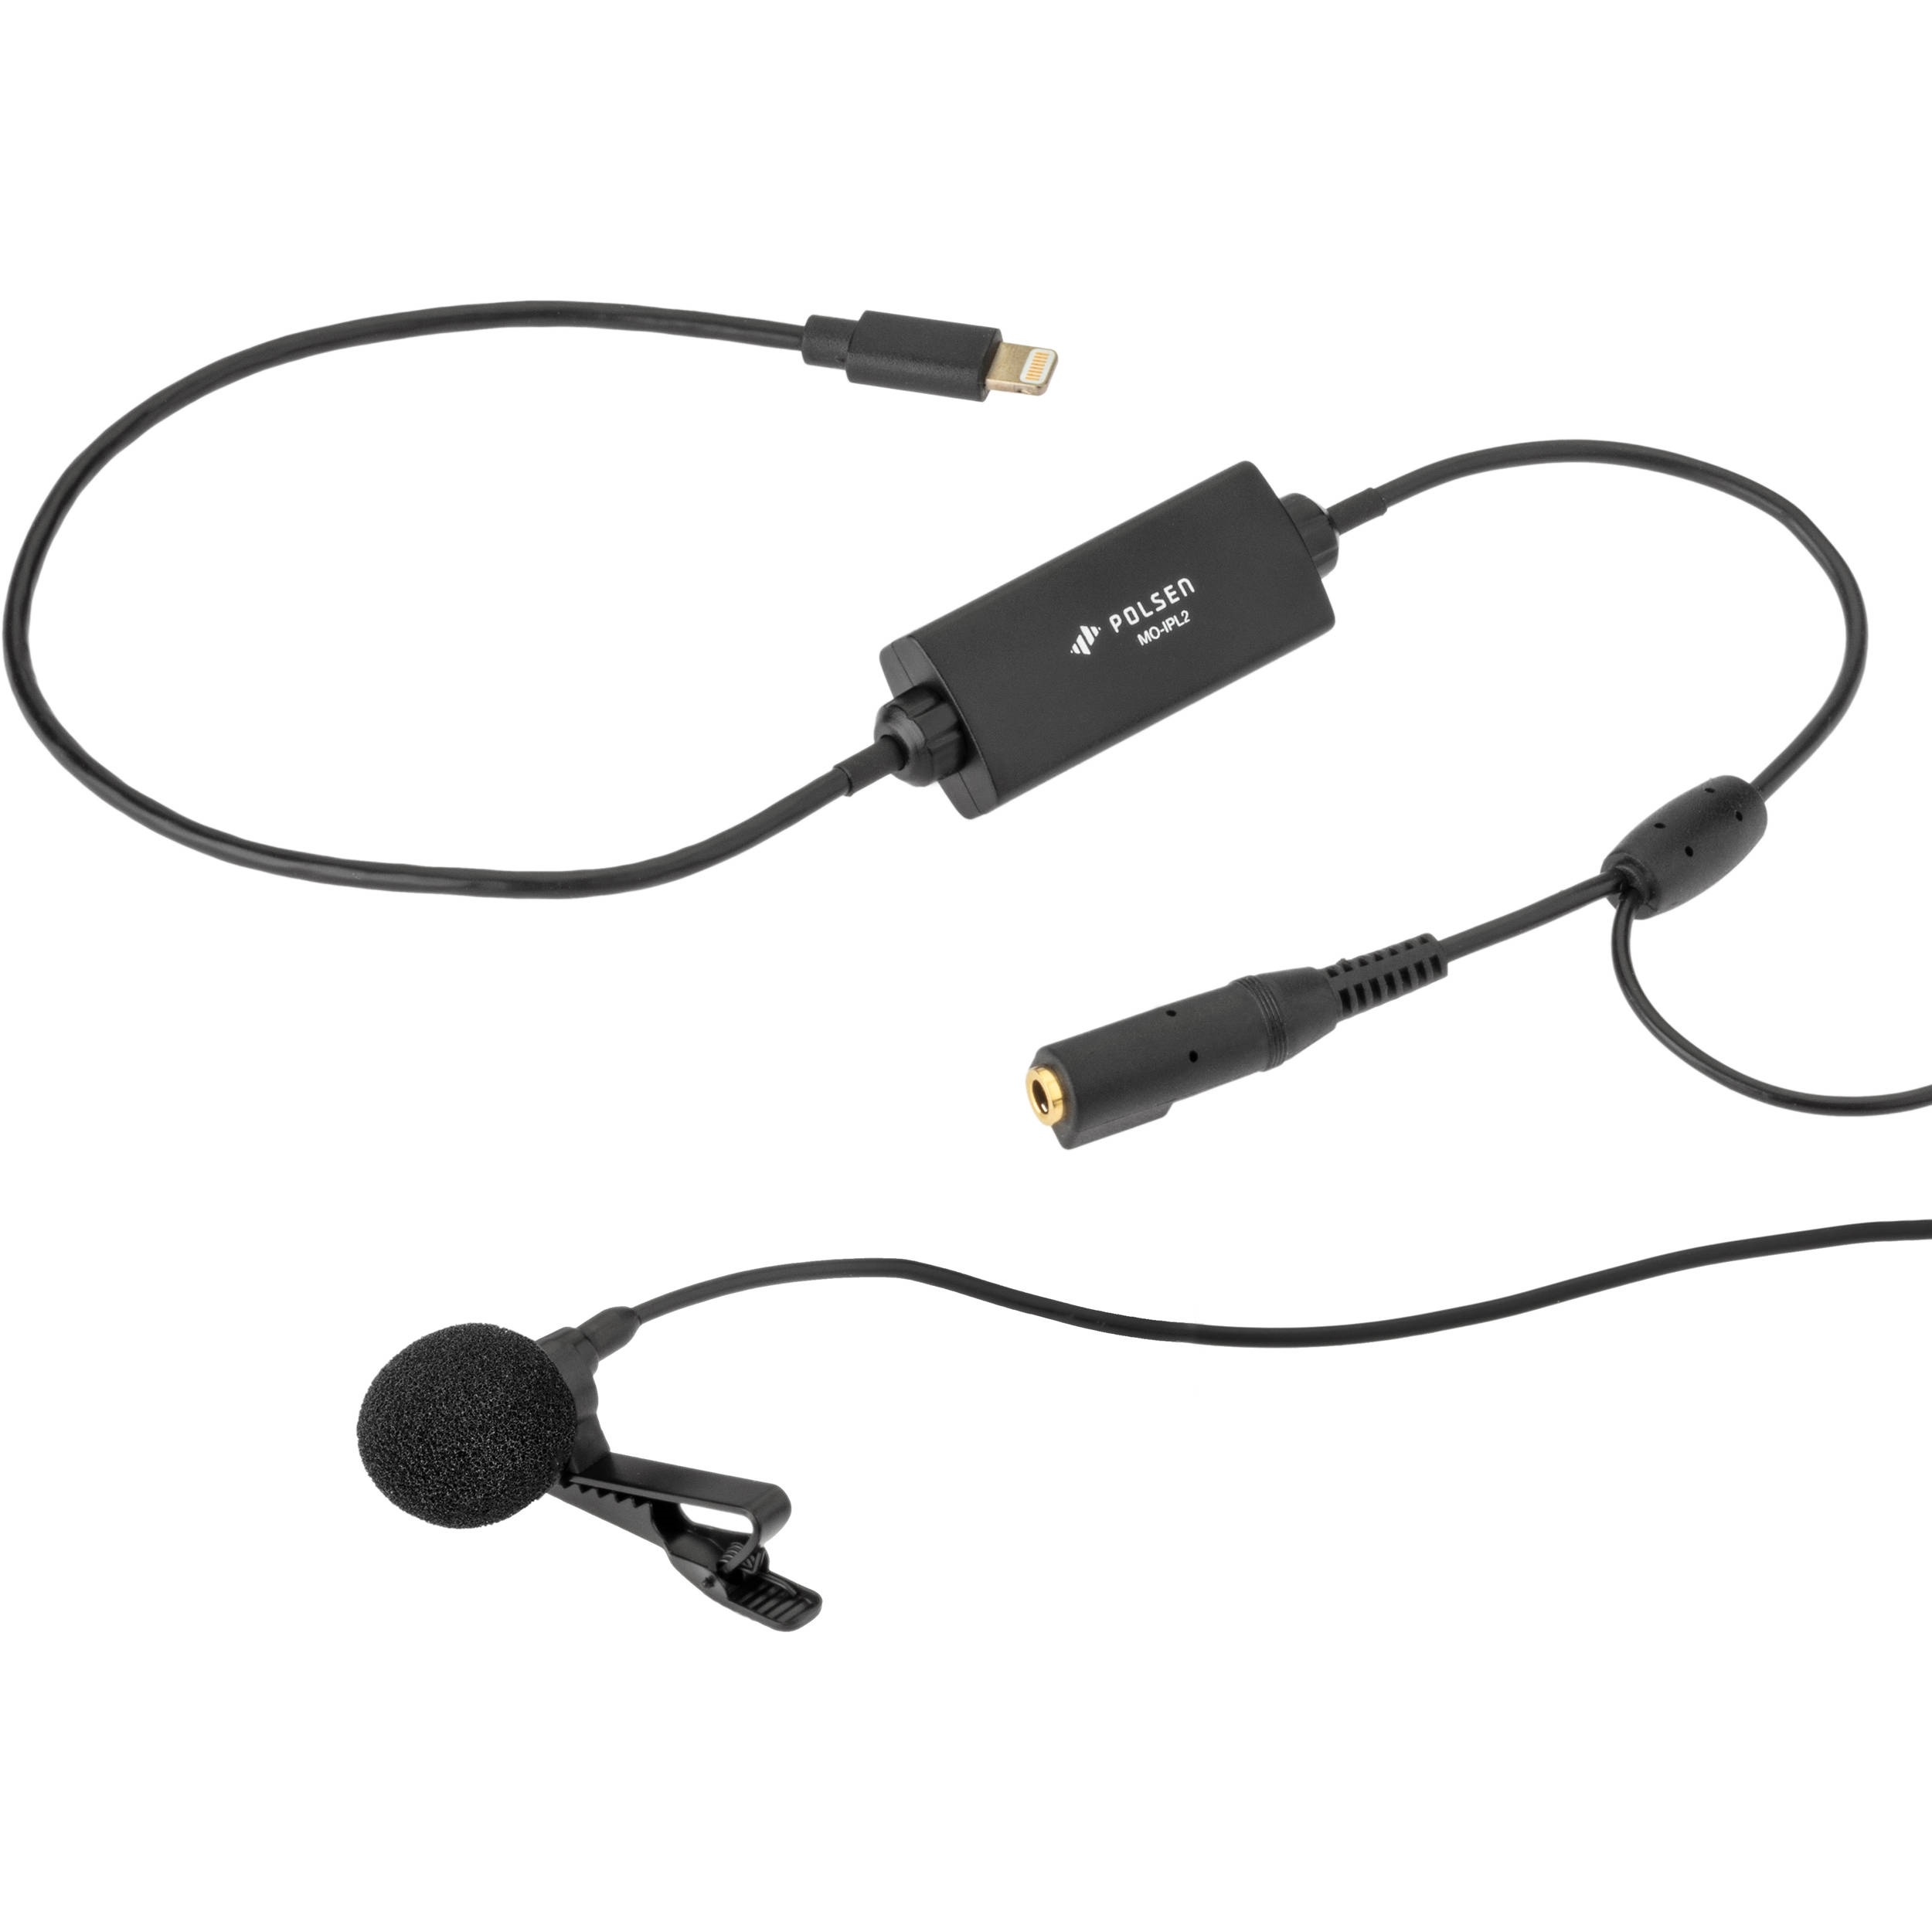 Polsen MO-IPL2 Lavalier Microphone for iOS Devices